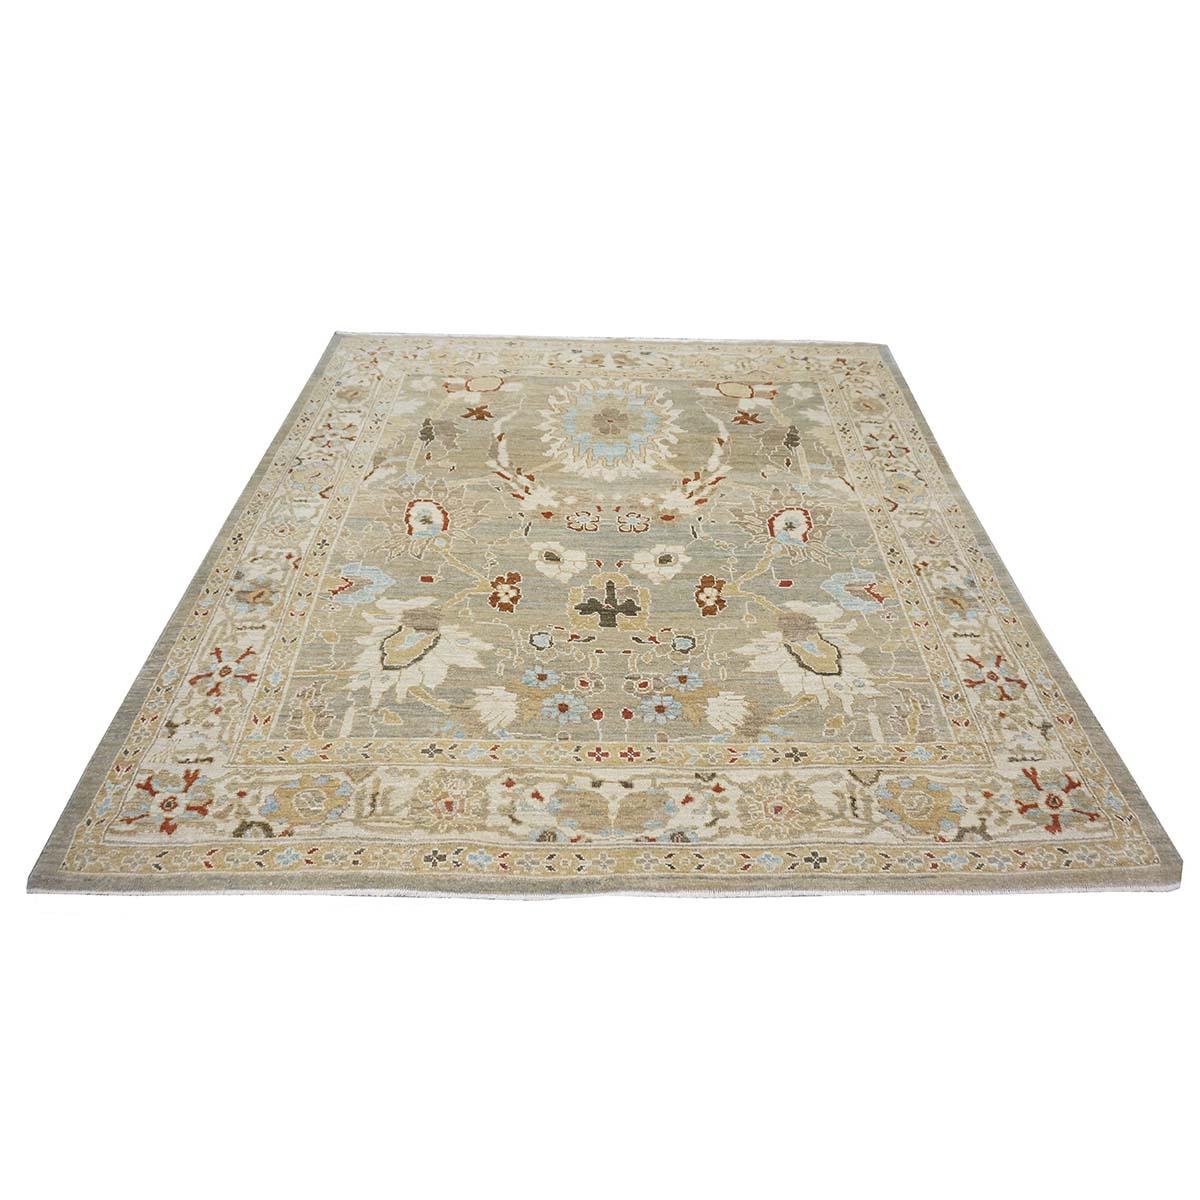 8x8 area rugs